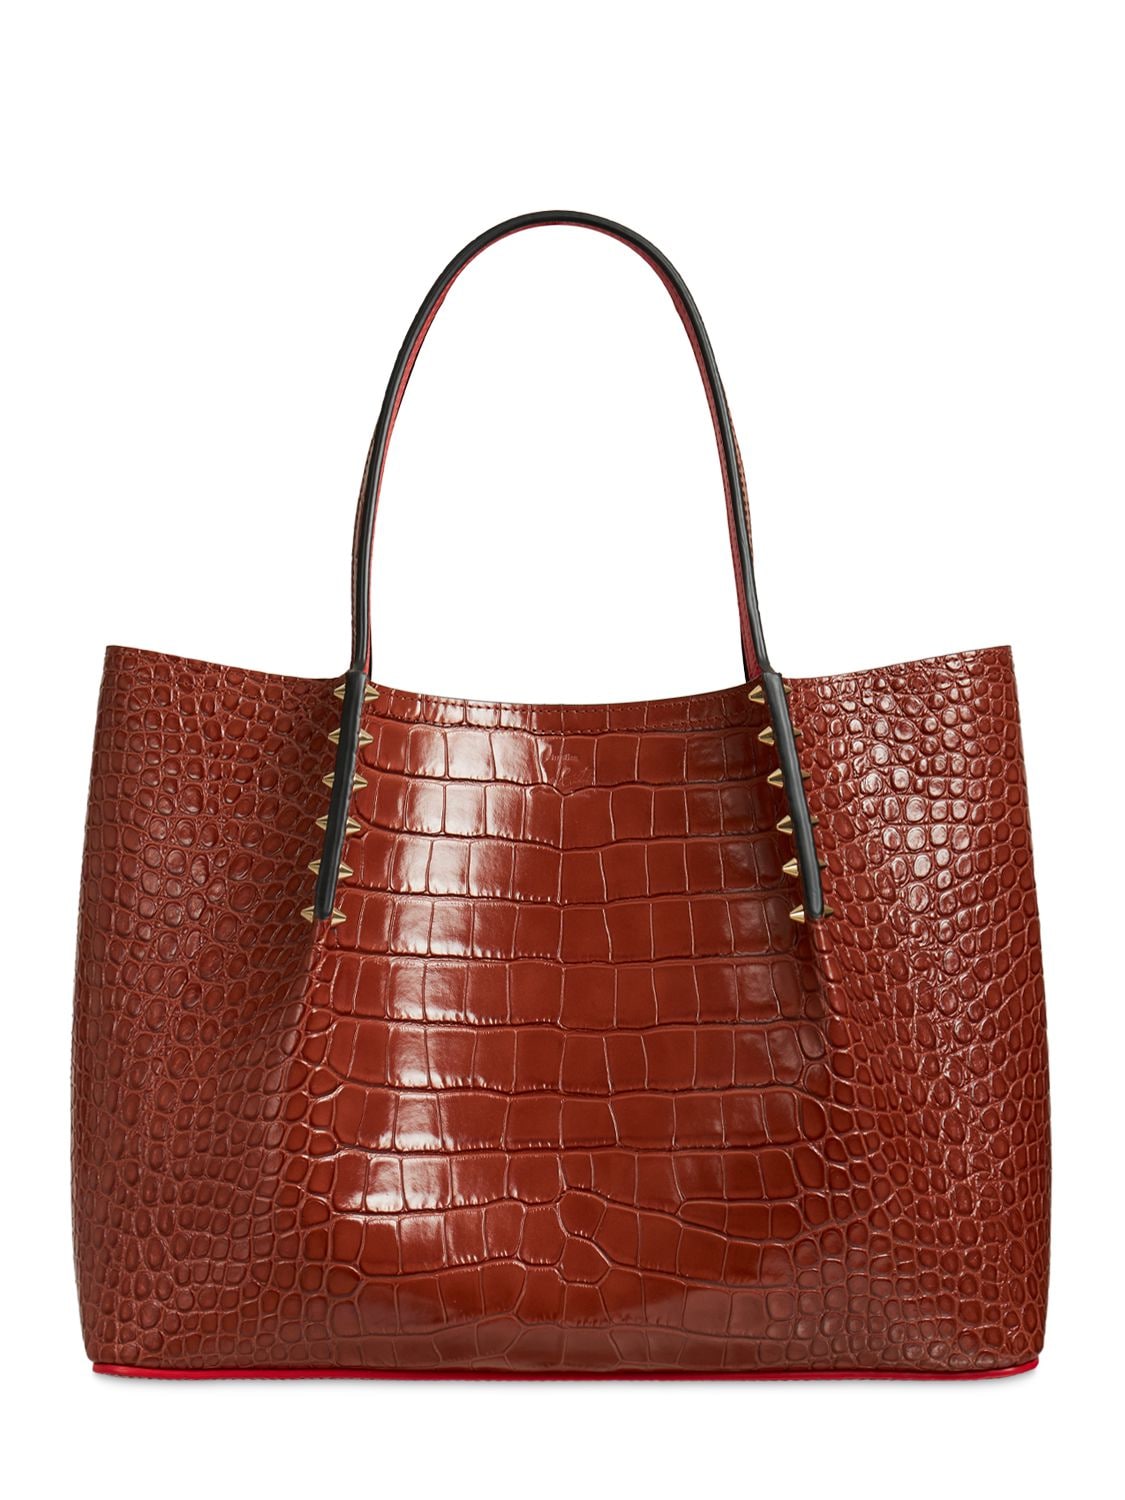 CHRISTIAN LOUBOUTIN CABAROCK CROC EMBOSSED LEATHER TOTE BAG,74IG6O033-QZCZMW2